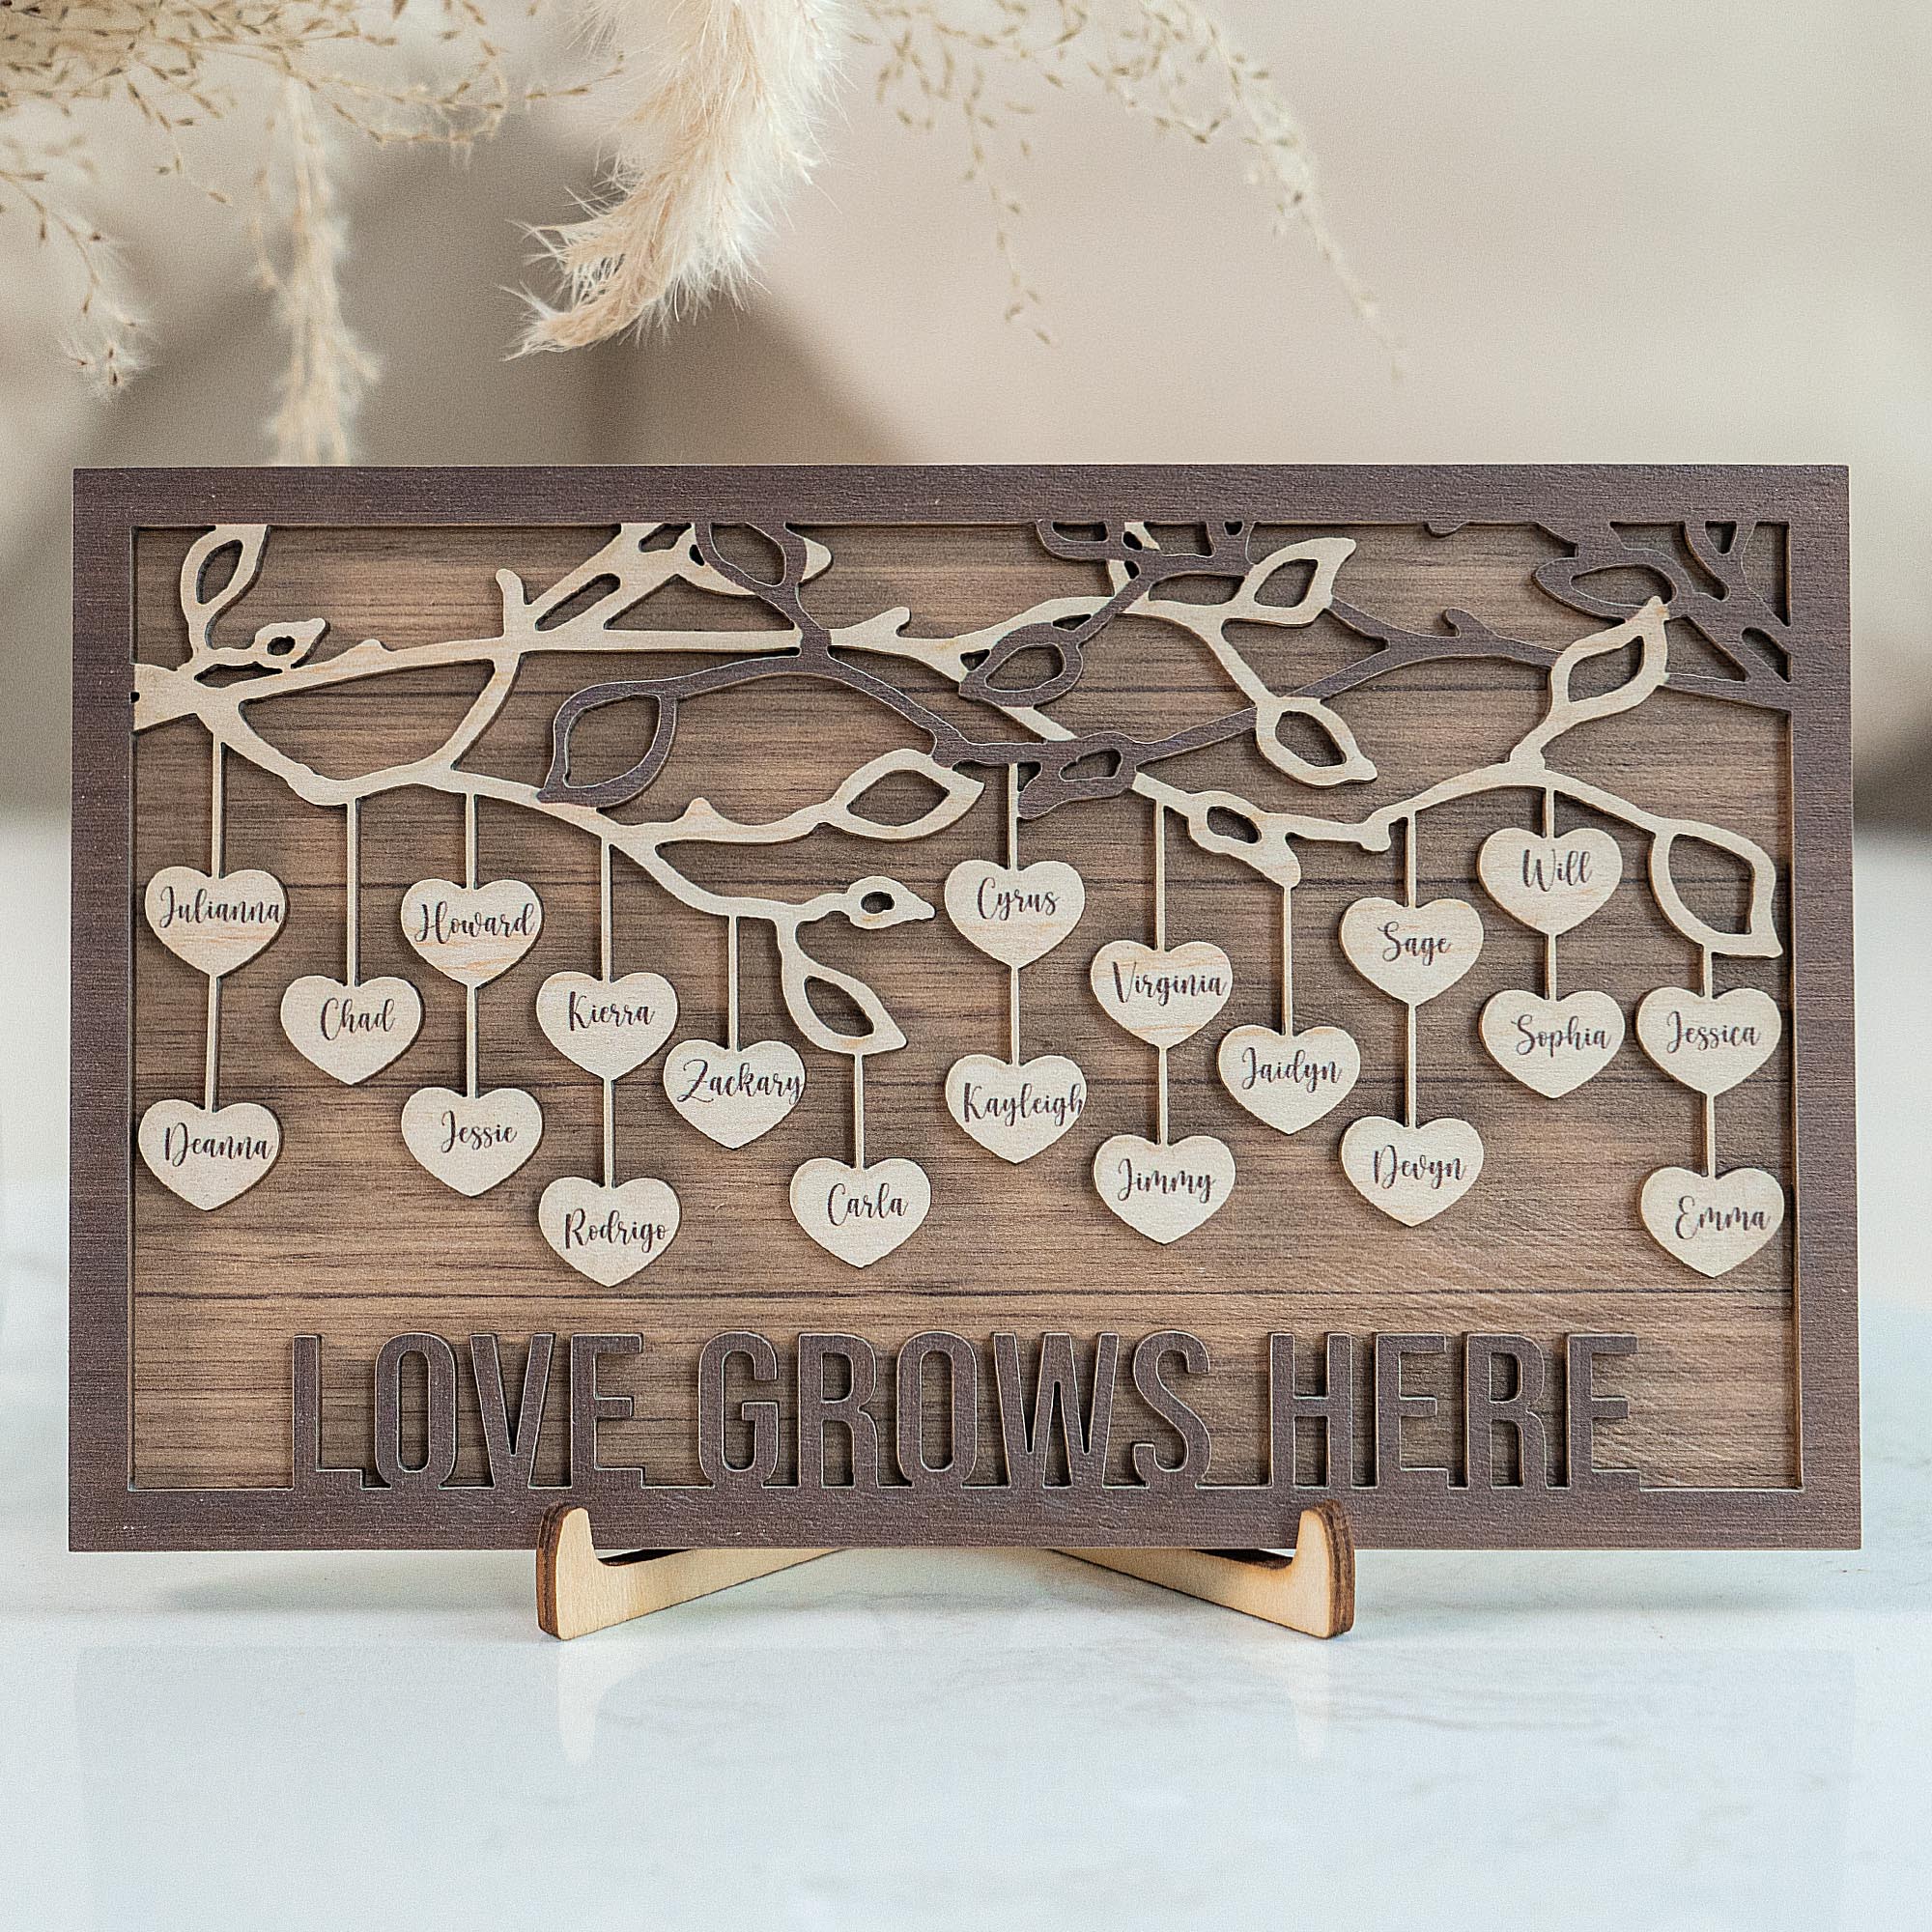 Love Grows Here - Personalized Wooden Plaque